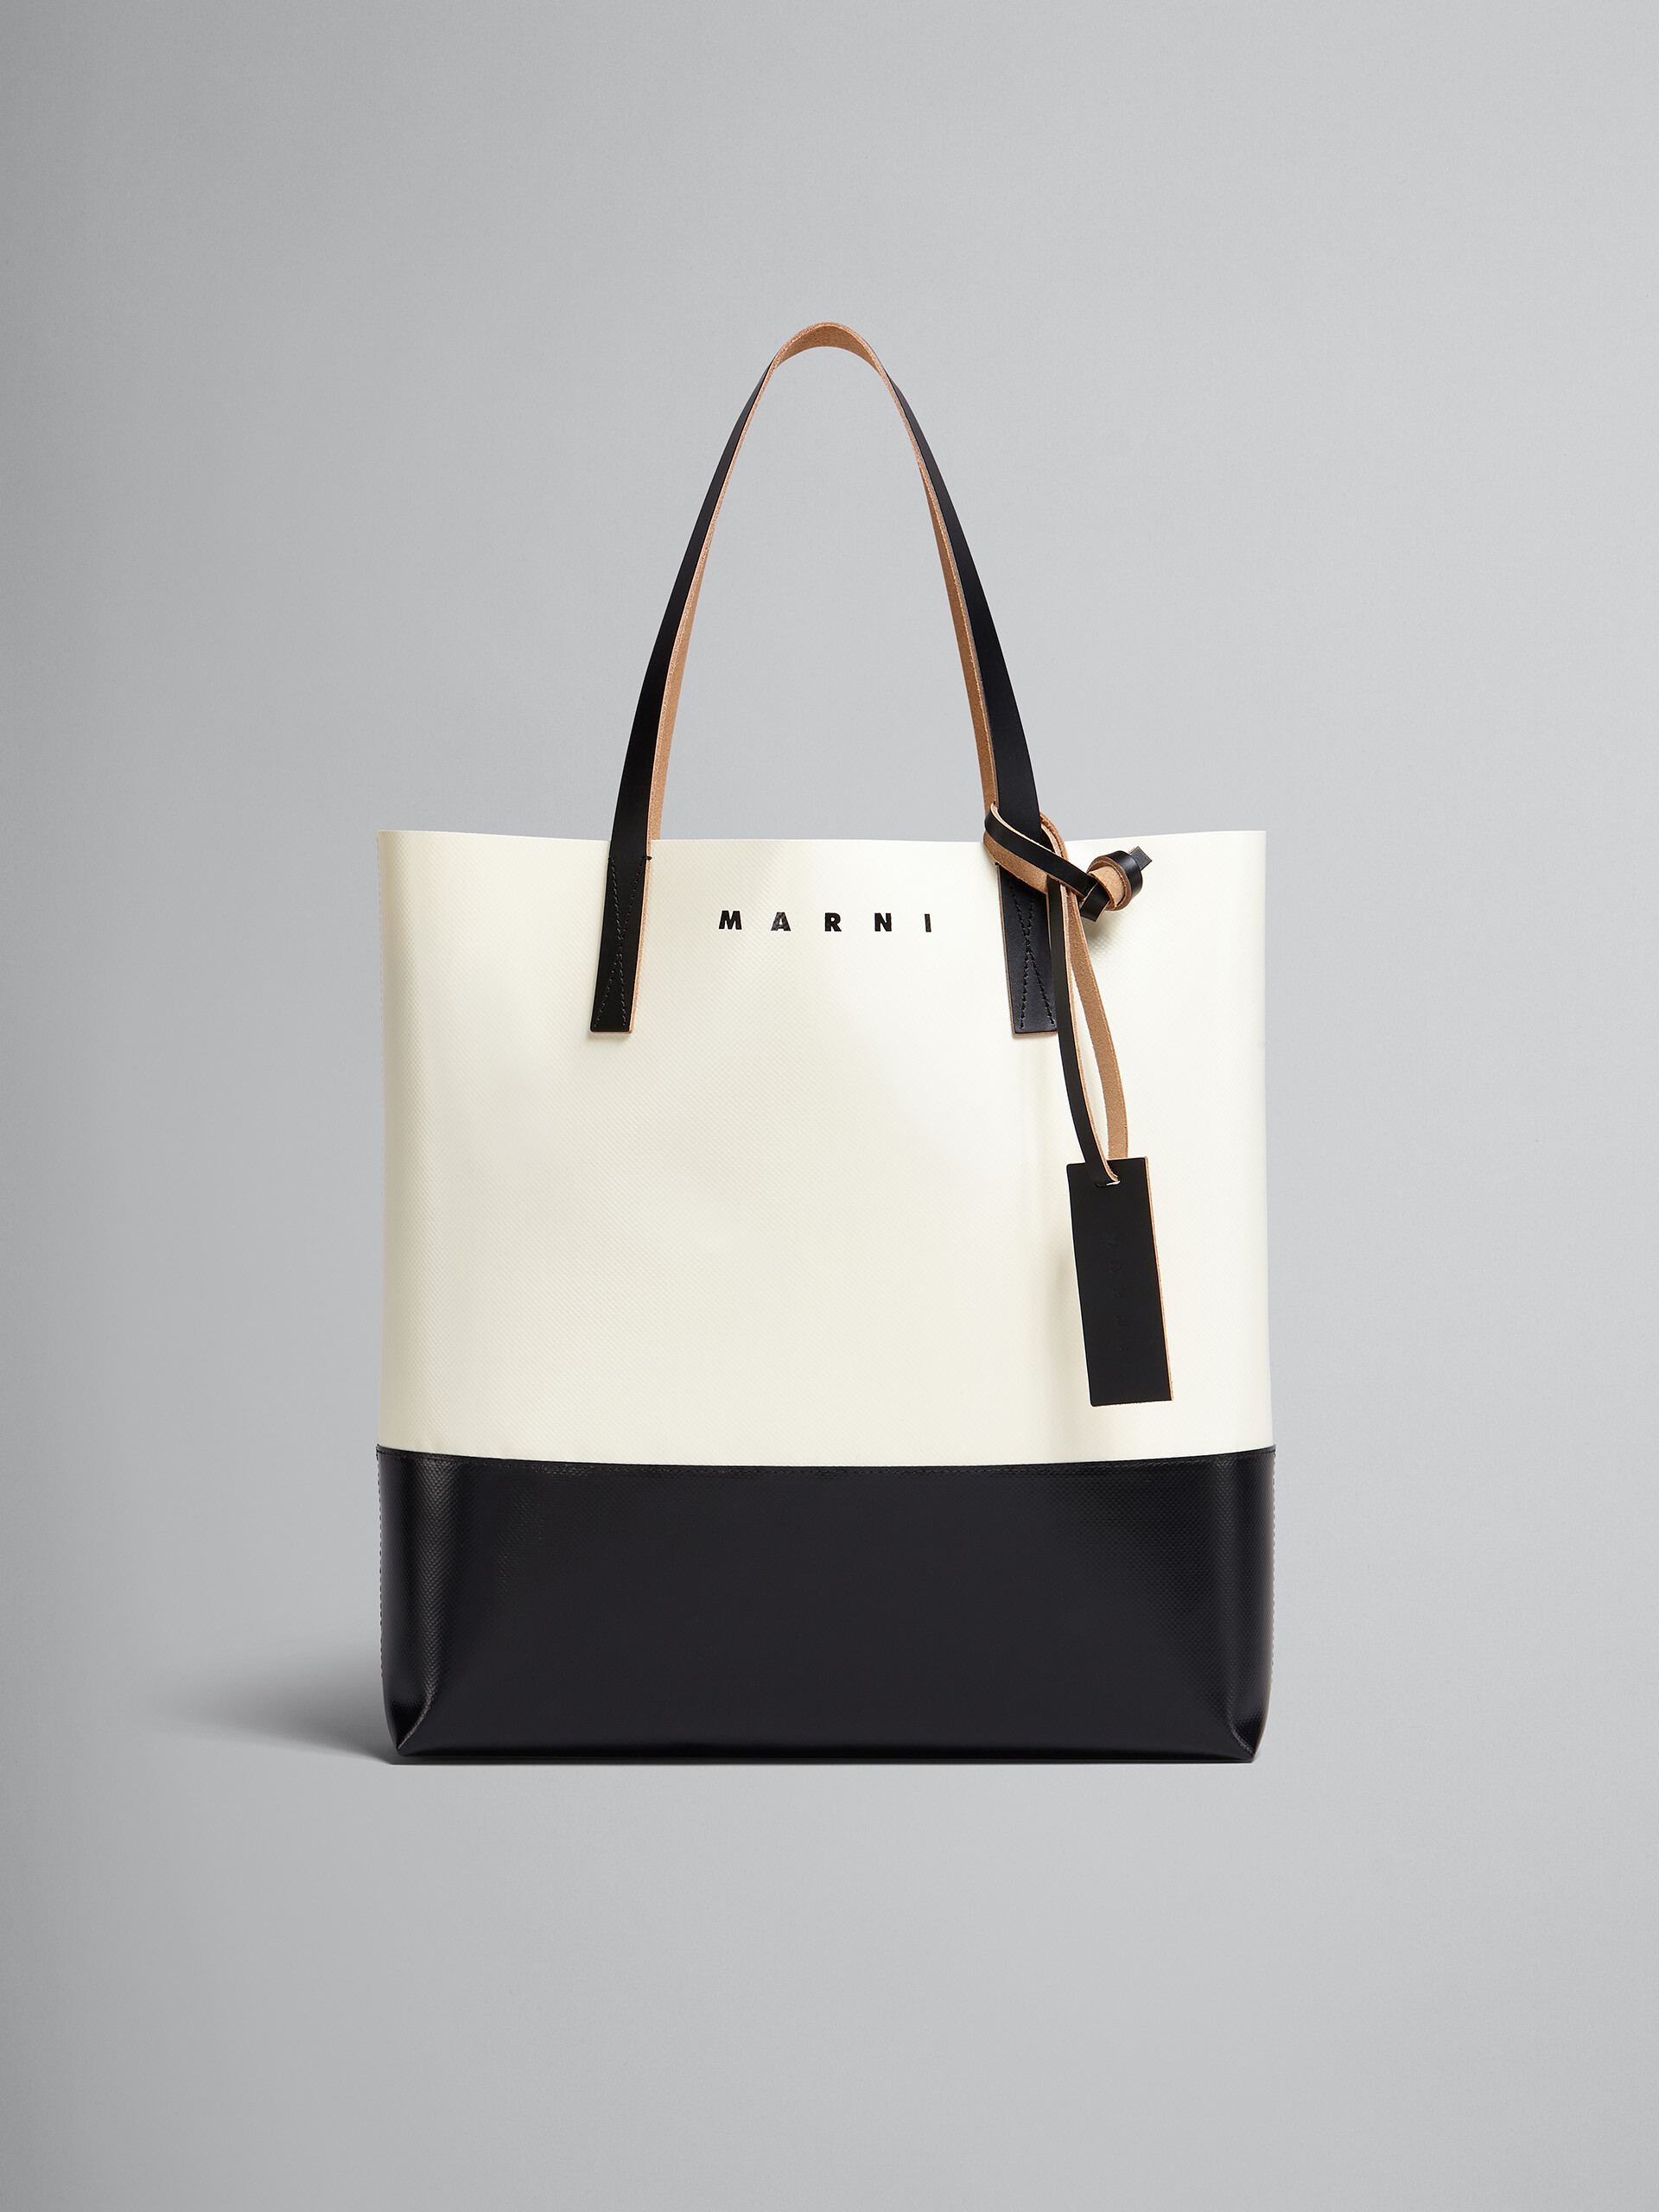 White and black shopping bag - Shopping Bags - Image 1